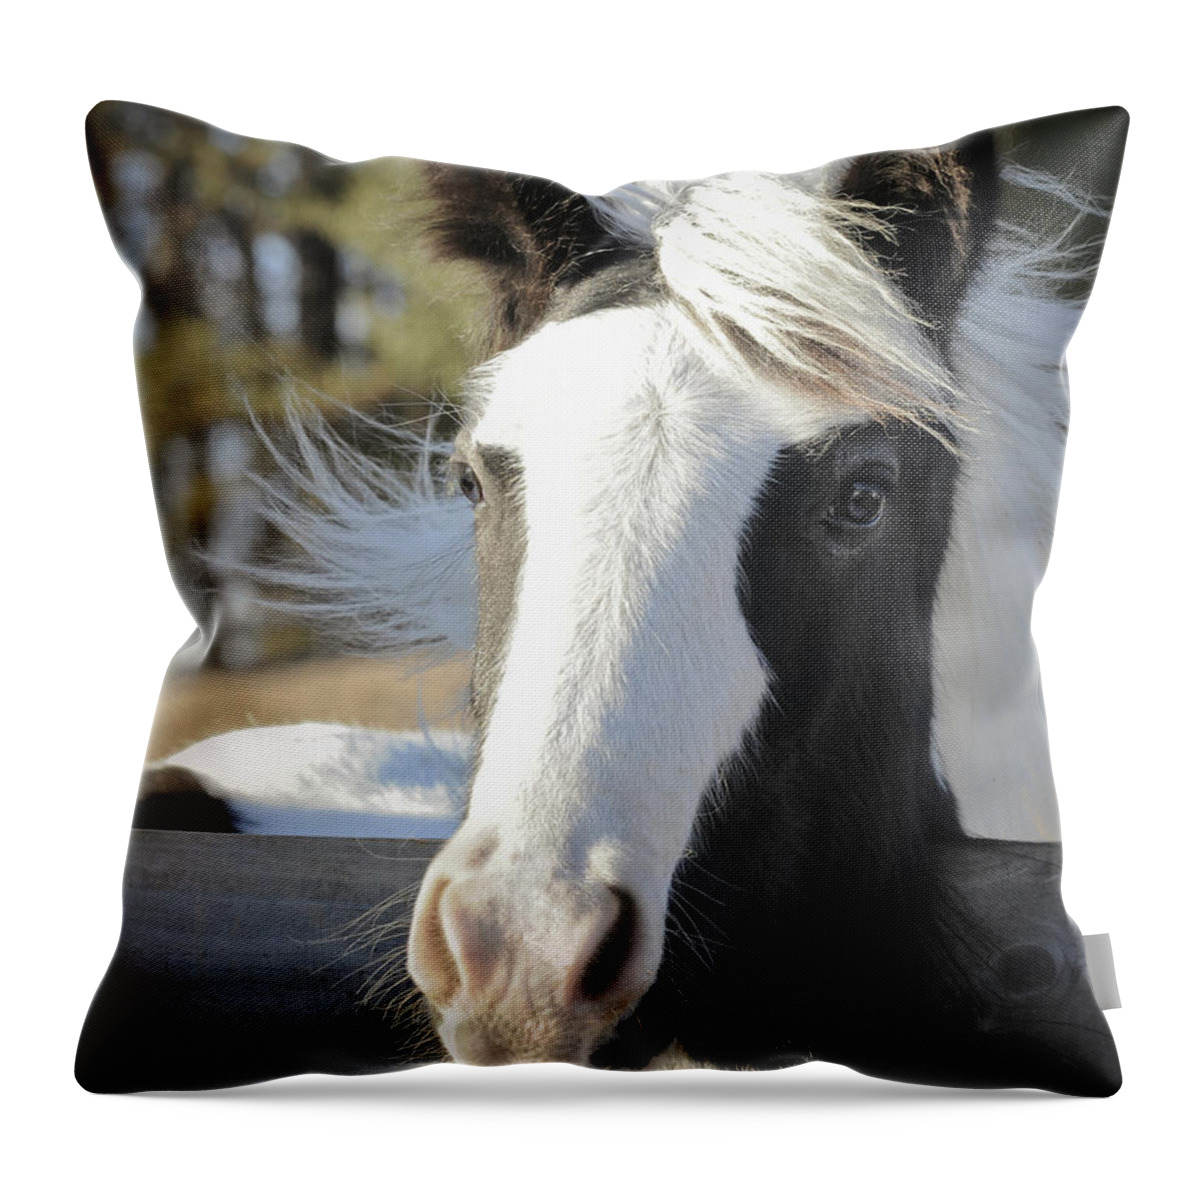  Throw Pillow featuring the photograph Sparkling Emma by Terry Kirkland Cook